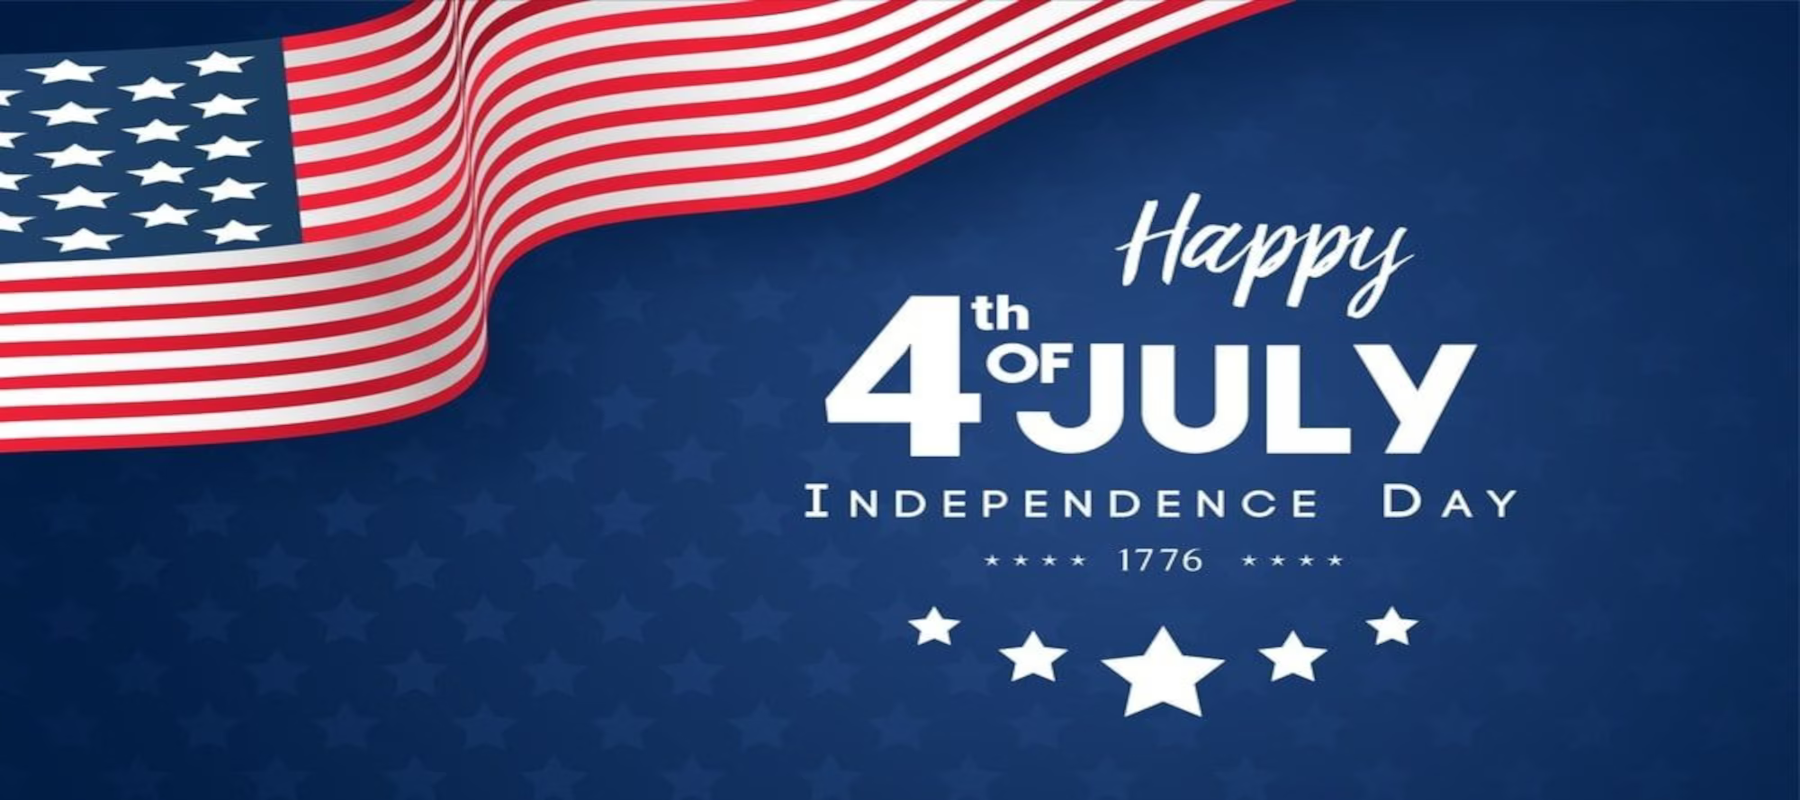 Happy 4th Of July To Our American Neighbours & Friends - A Day To Celebrate Freedom!